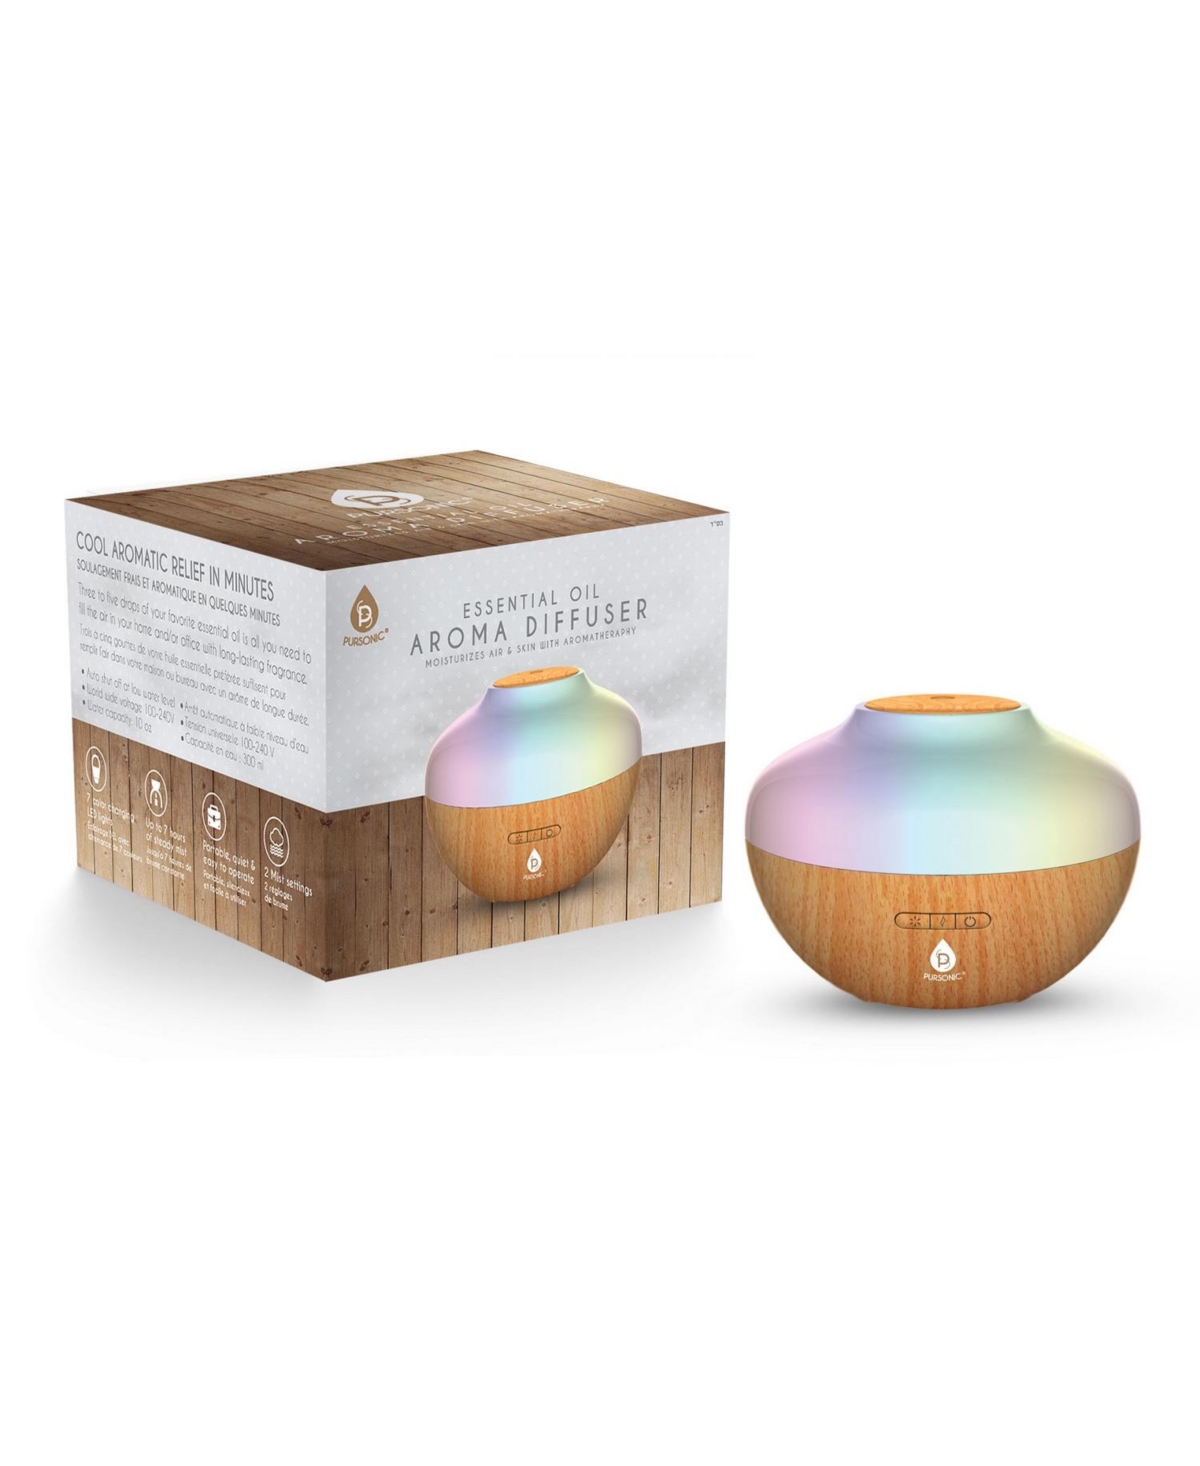 300ml Aromatherapy Essential Oil Diffuser Moisturizes Air & Skin, 7 Color Changing Led Lights Waterless Auto Shut-Off - Natural